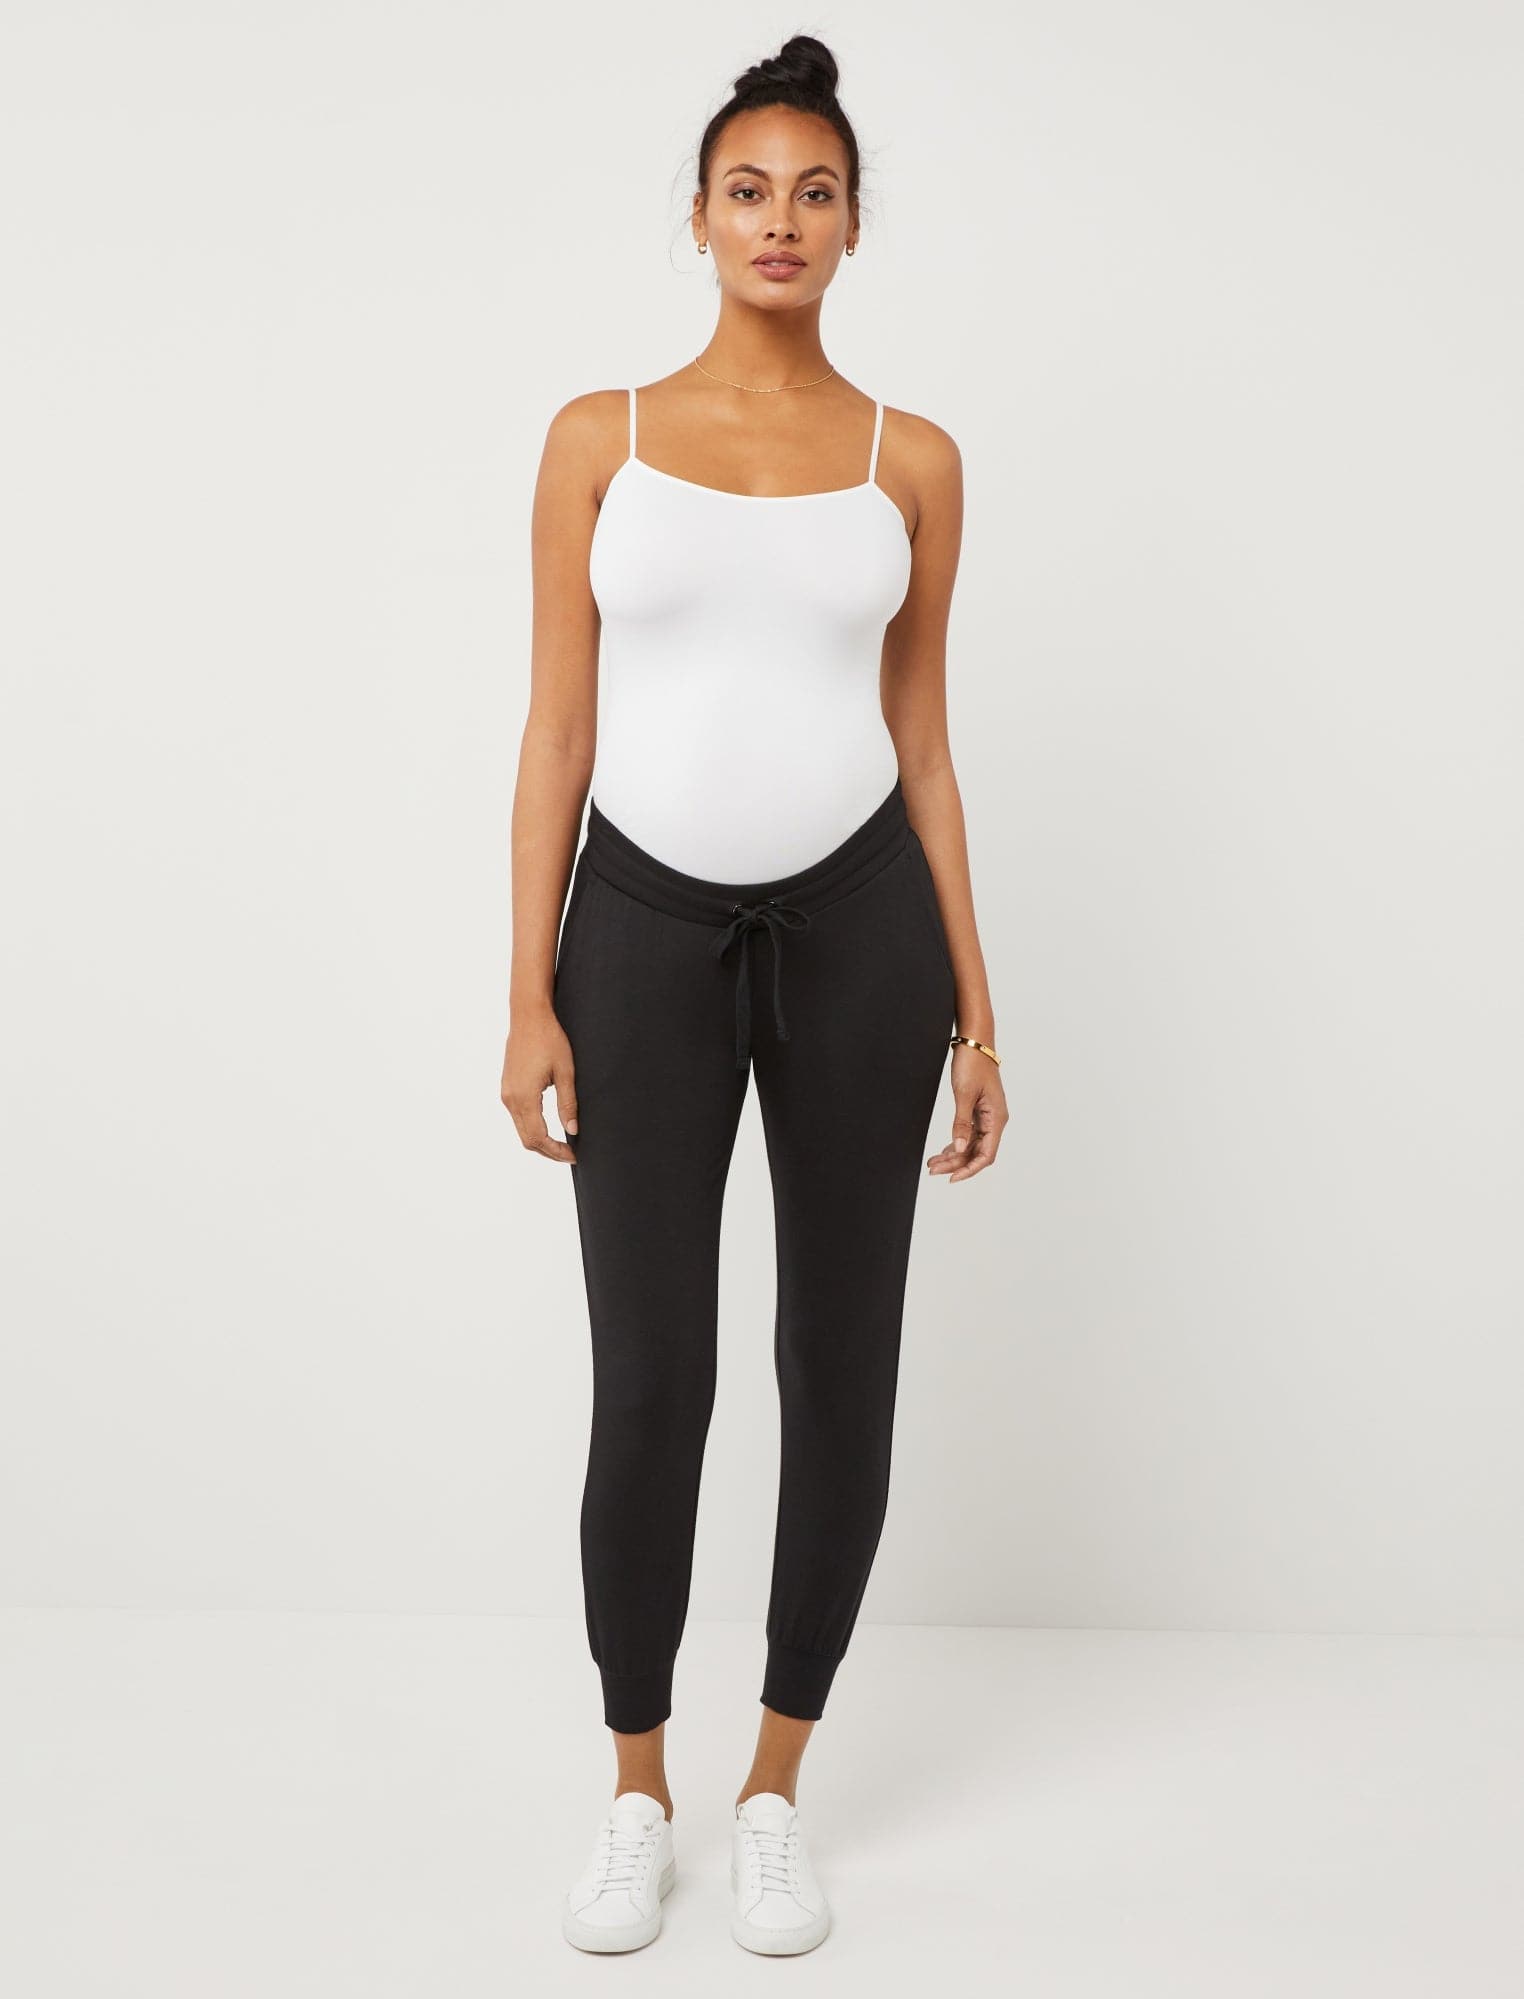 Luxe Essentials Secret Fit Belly Ultra Soft Maternity Leggings - A